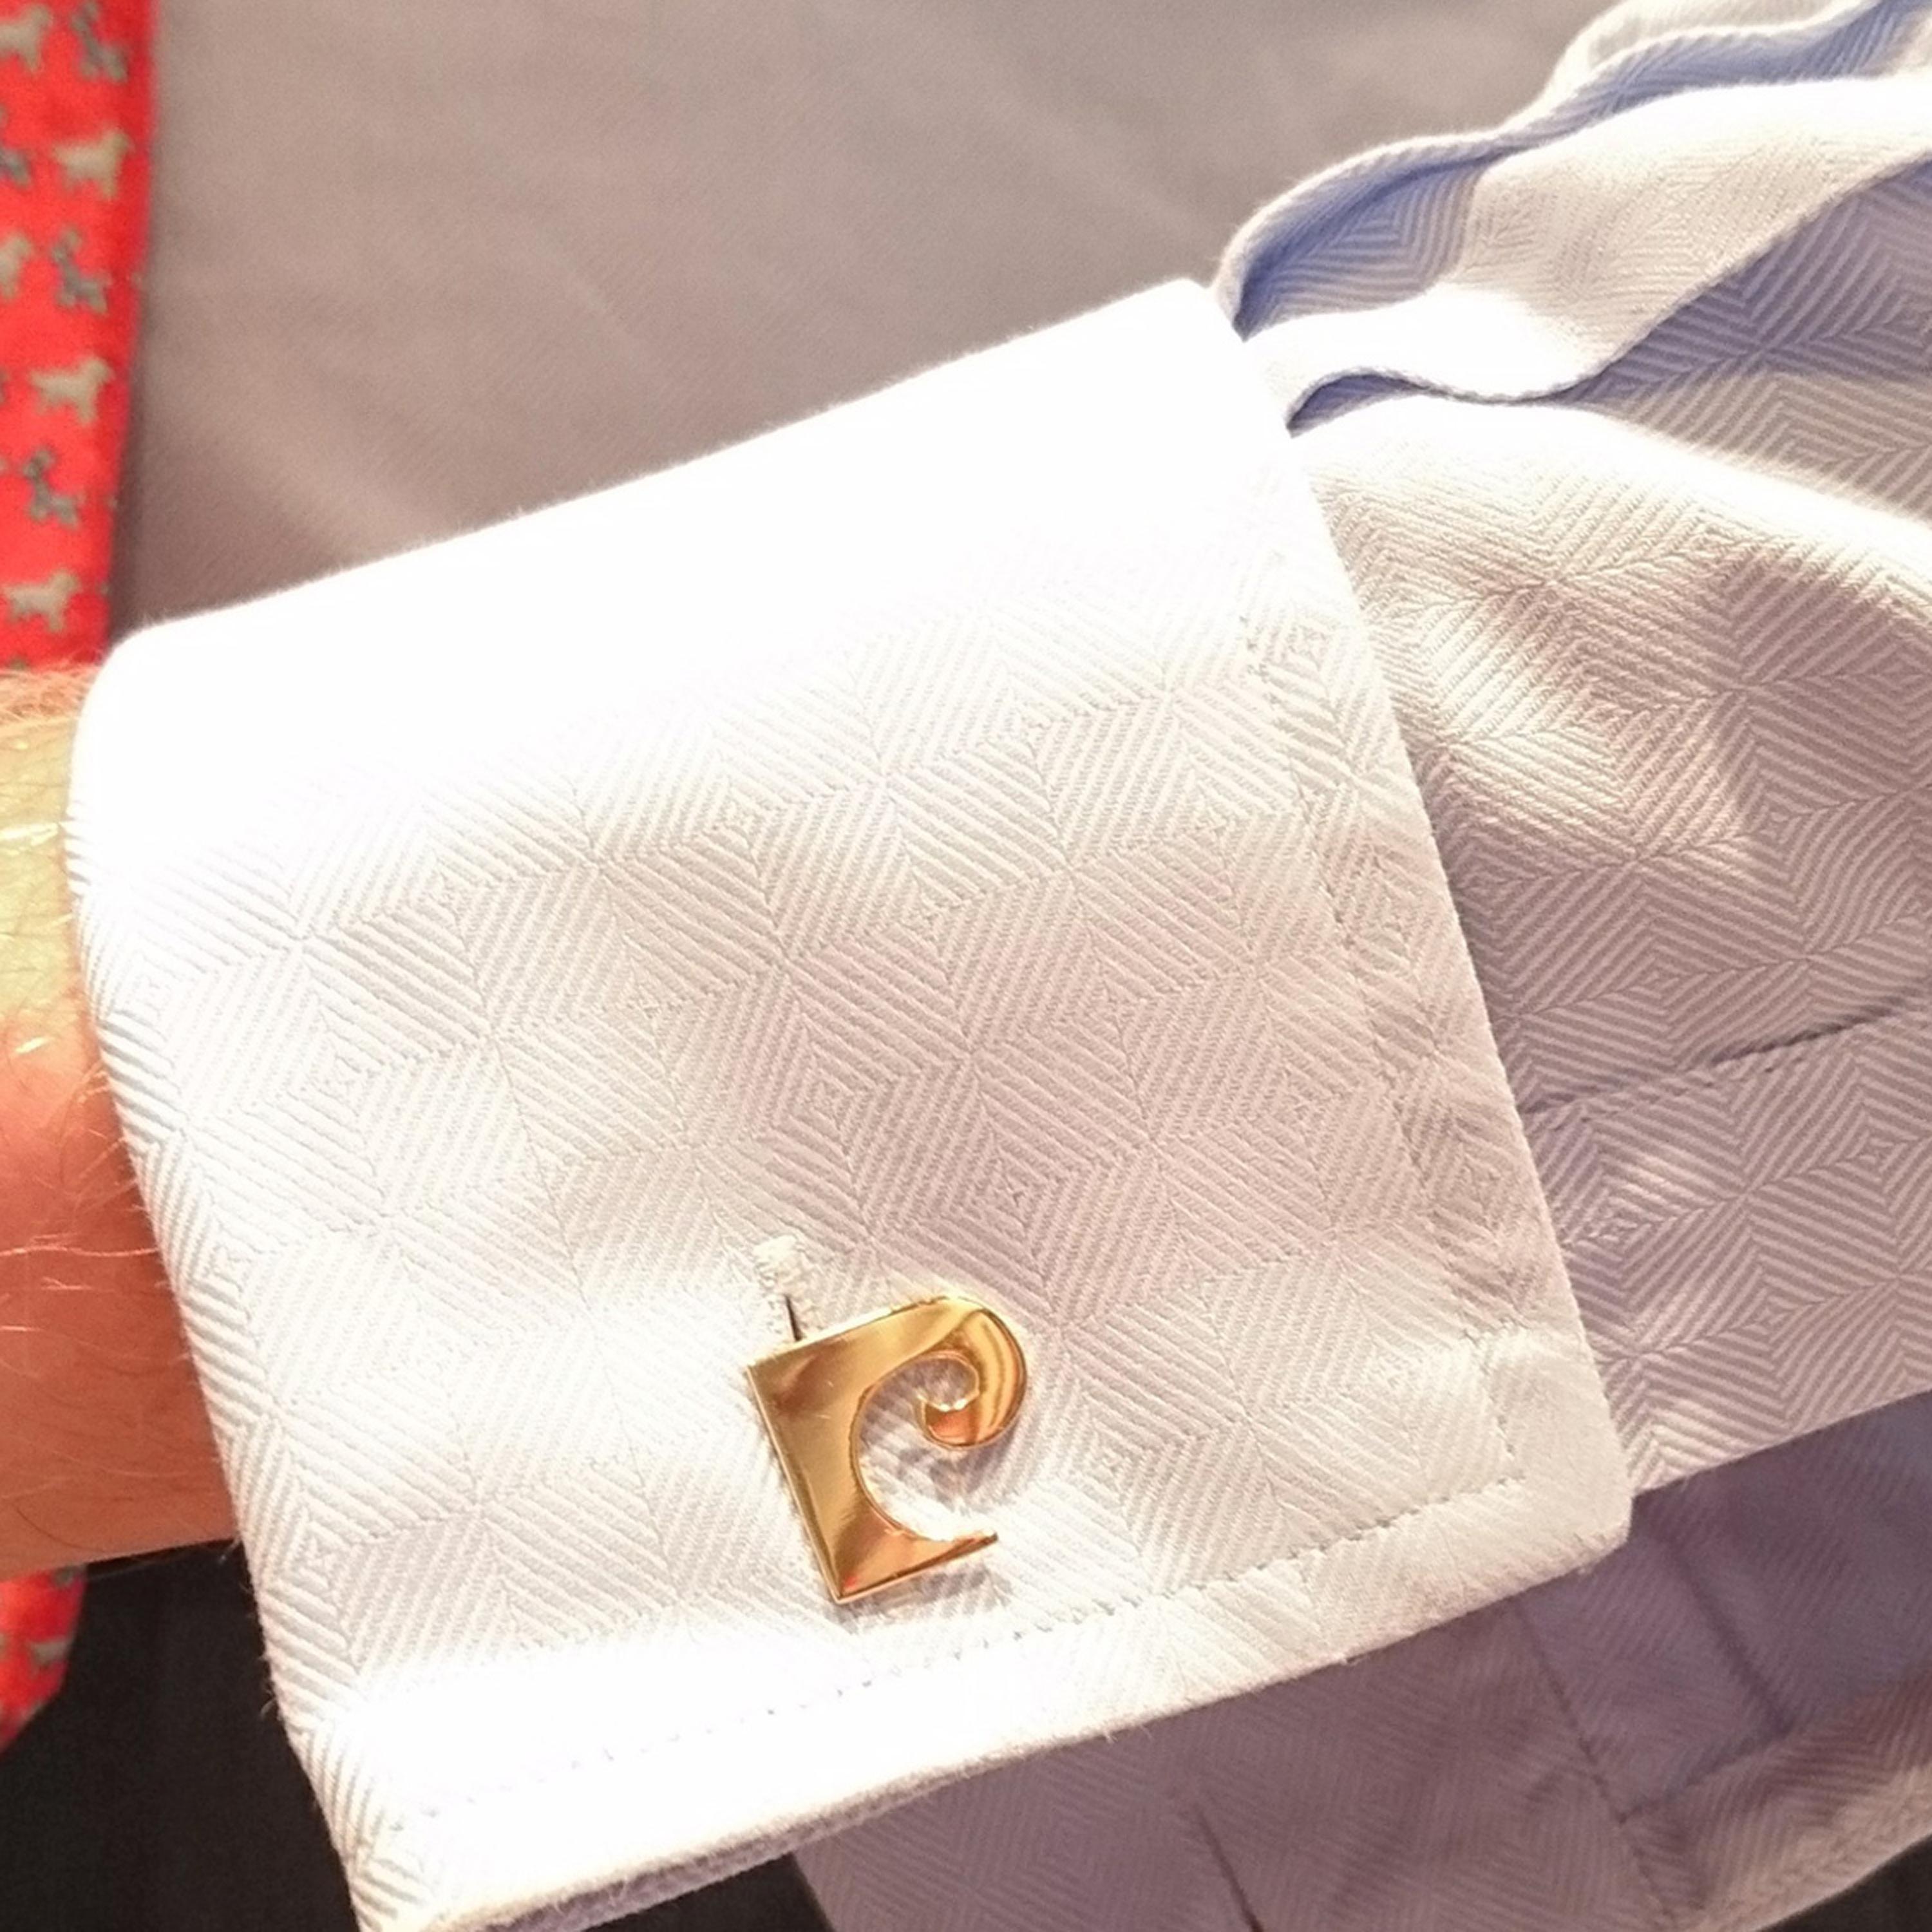 A pair of Pierre Cardin cufflinks, with the iconic Pierre Cardin logo, with swivel back fittings. These vintage, gold plated, cufflinks come in their original Pierre Cardin case. Circa 1960.